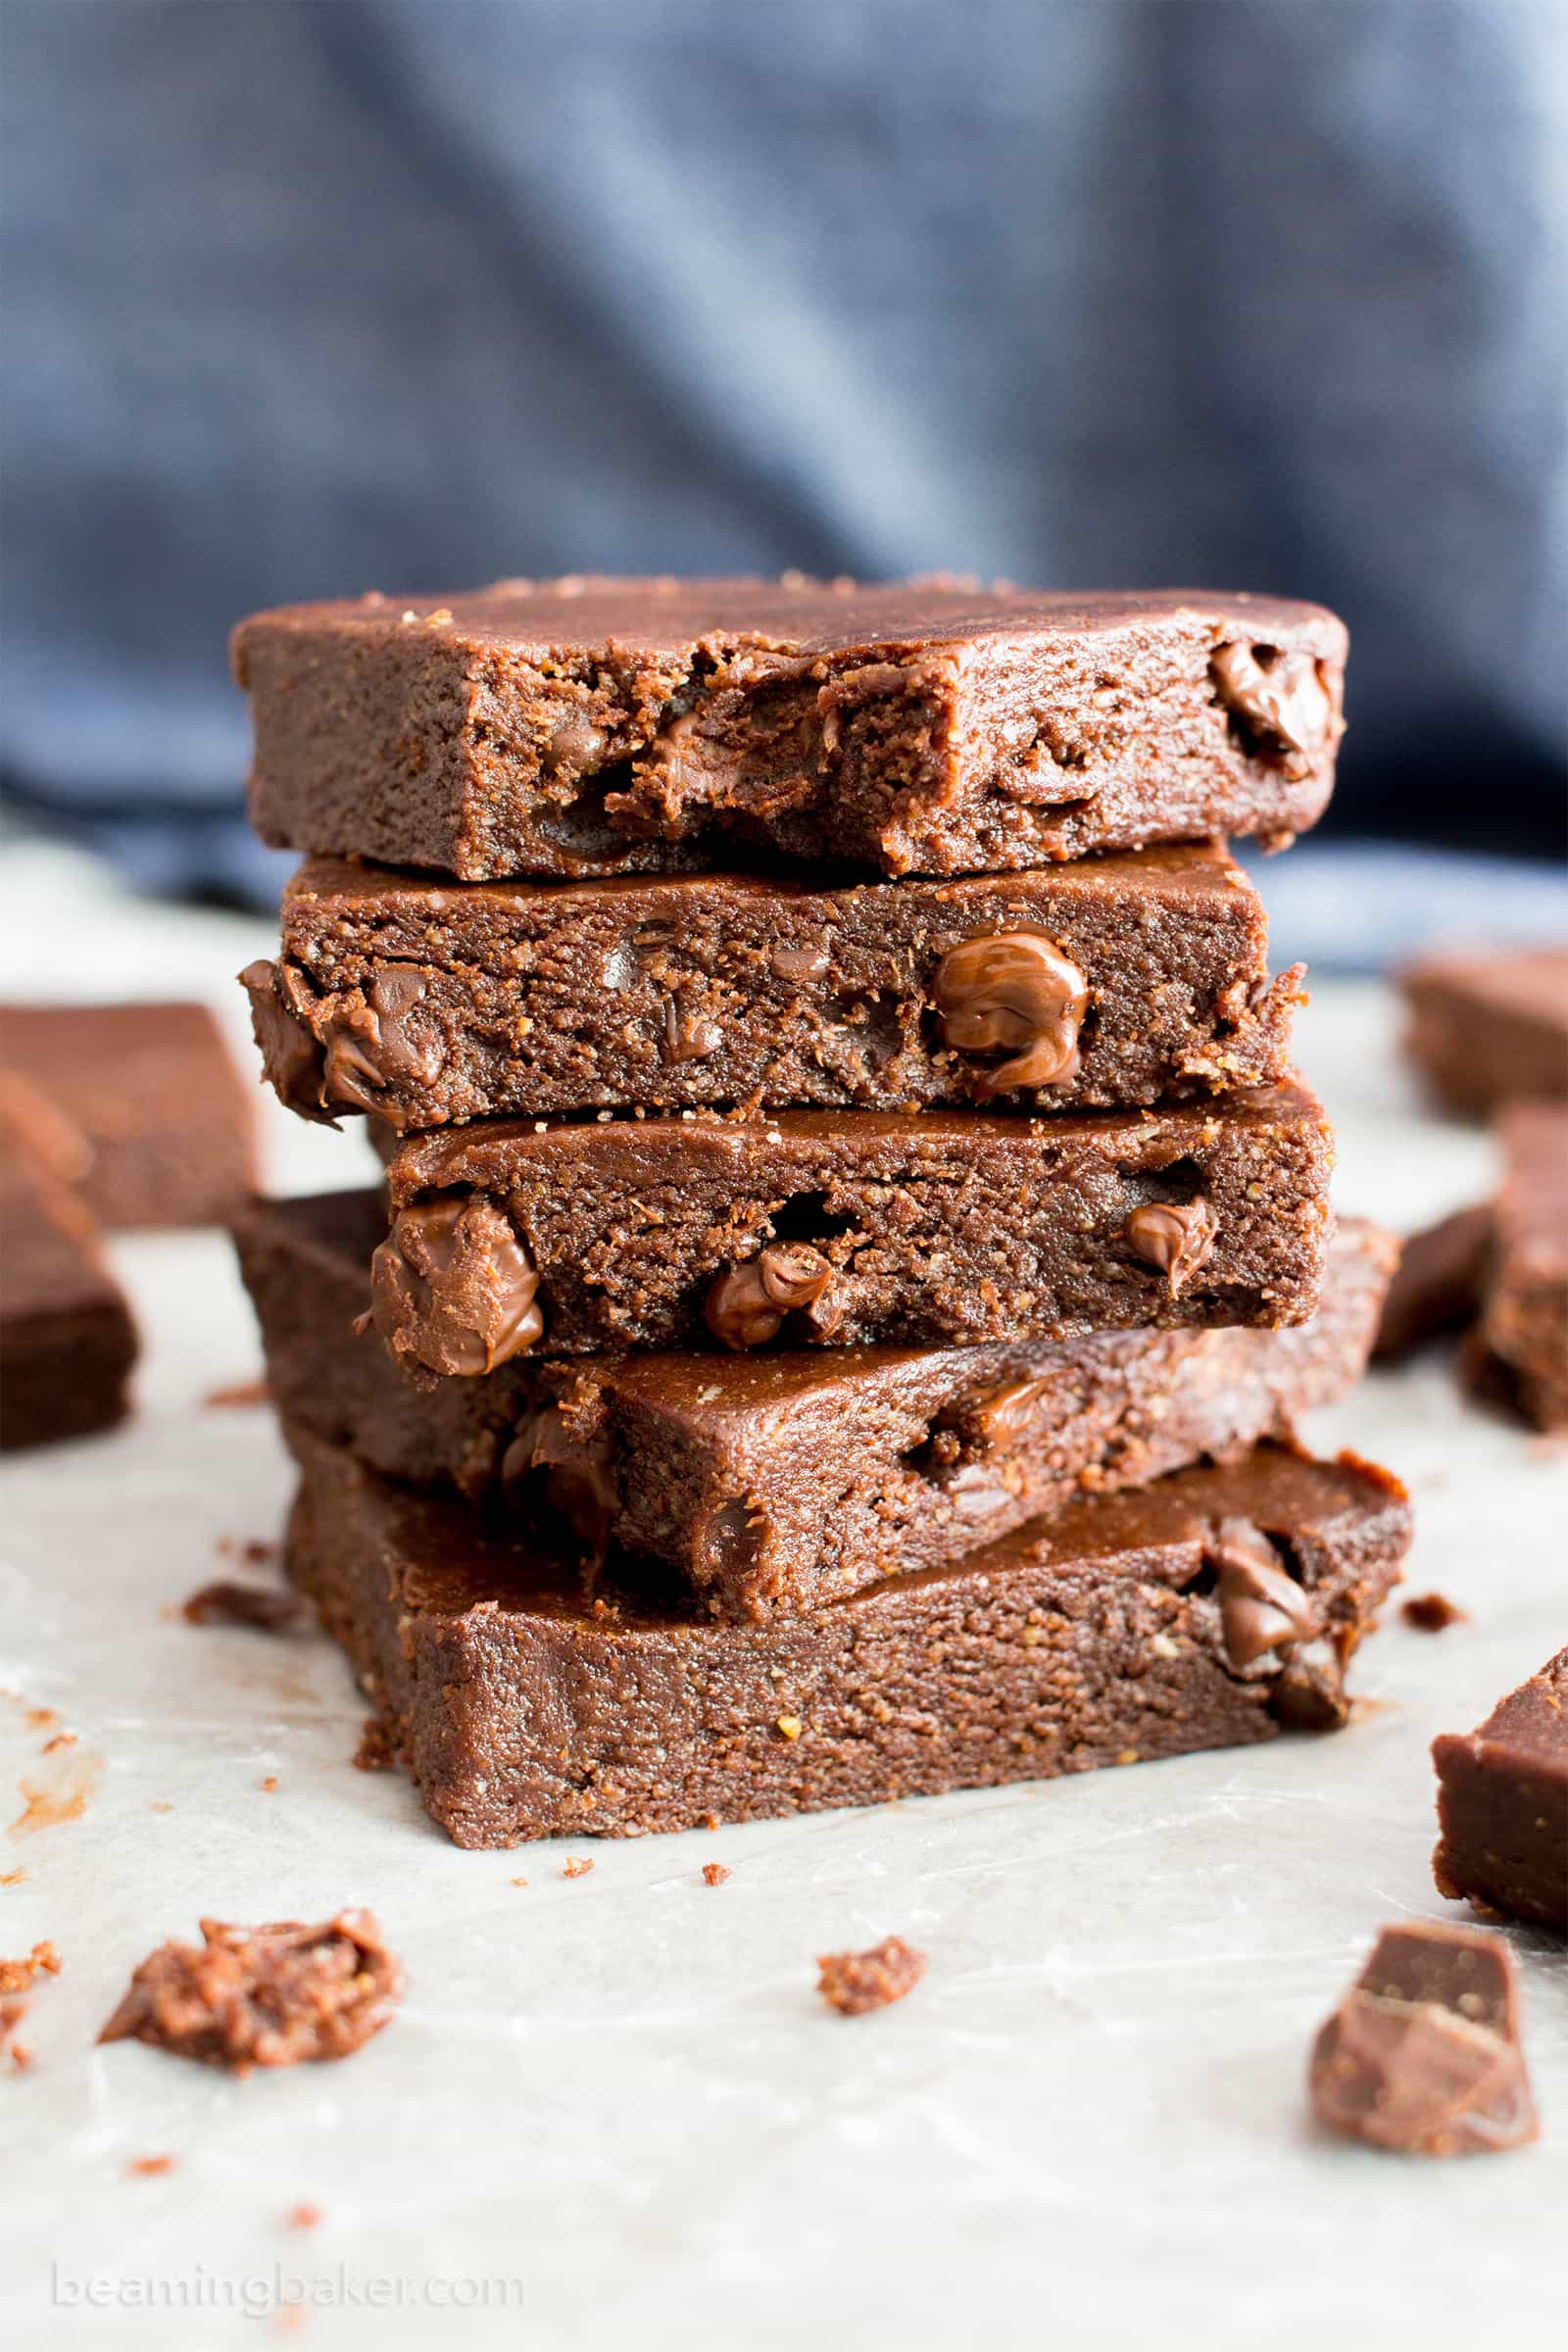 No Bake Dark Chocolate Almond Butter Paleo Brownies (V, GF): a 6-ingredient recipe for luxuriously rich no bake brownies packed with chocolate chips and ready in minutes! #Vegan #Chocolate #GlutenFree #DairyFree #Paleo #Desserts #Healthy | Recipe on BeamingBaker.com